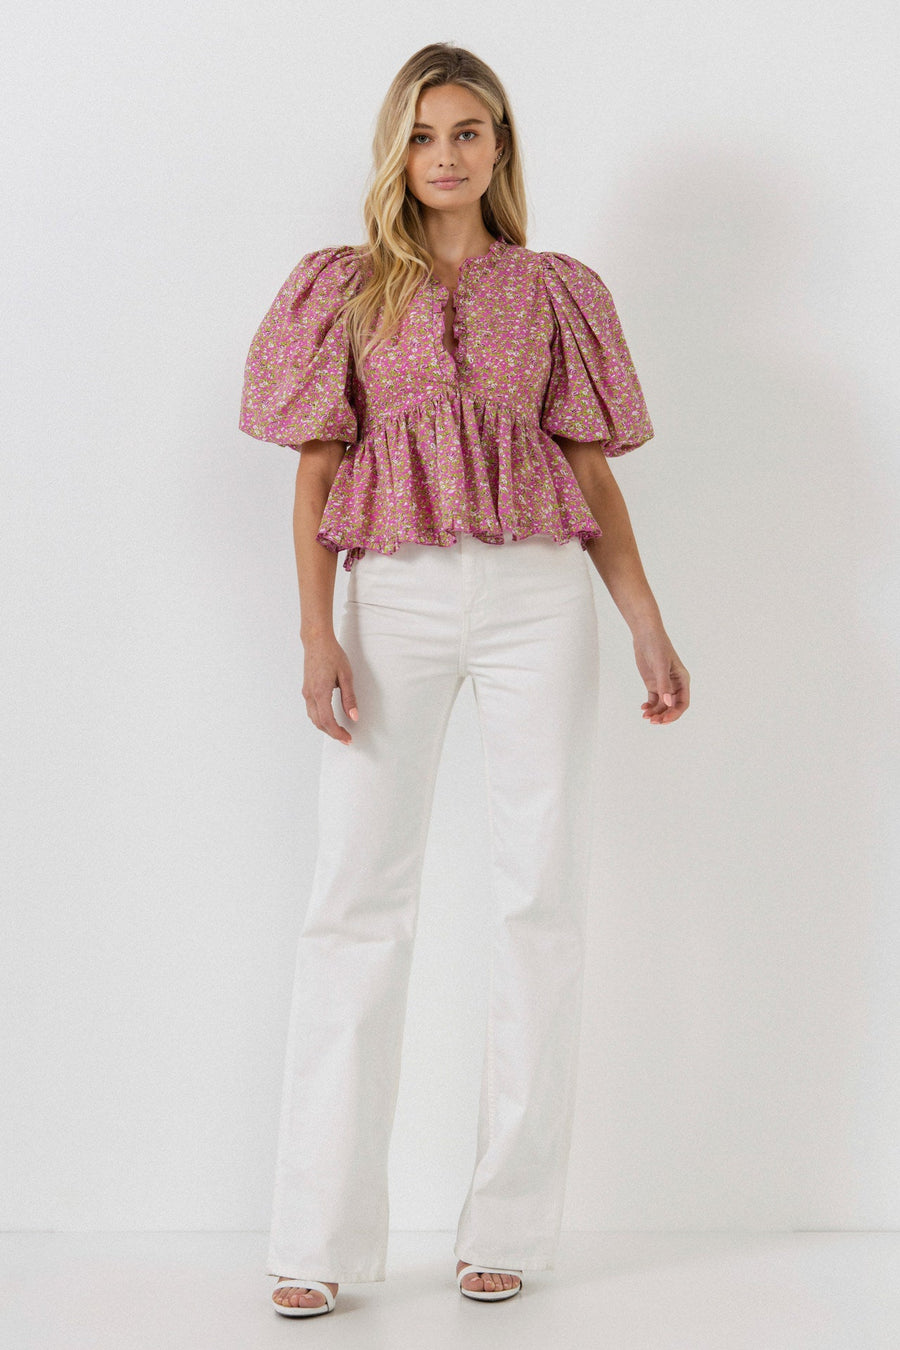 FREE THE ROSES-Puff Sleeve Ruffled V Blouse-TOPS available at Objectrare